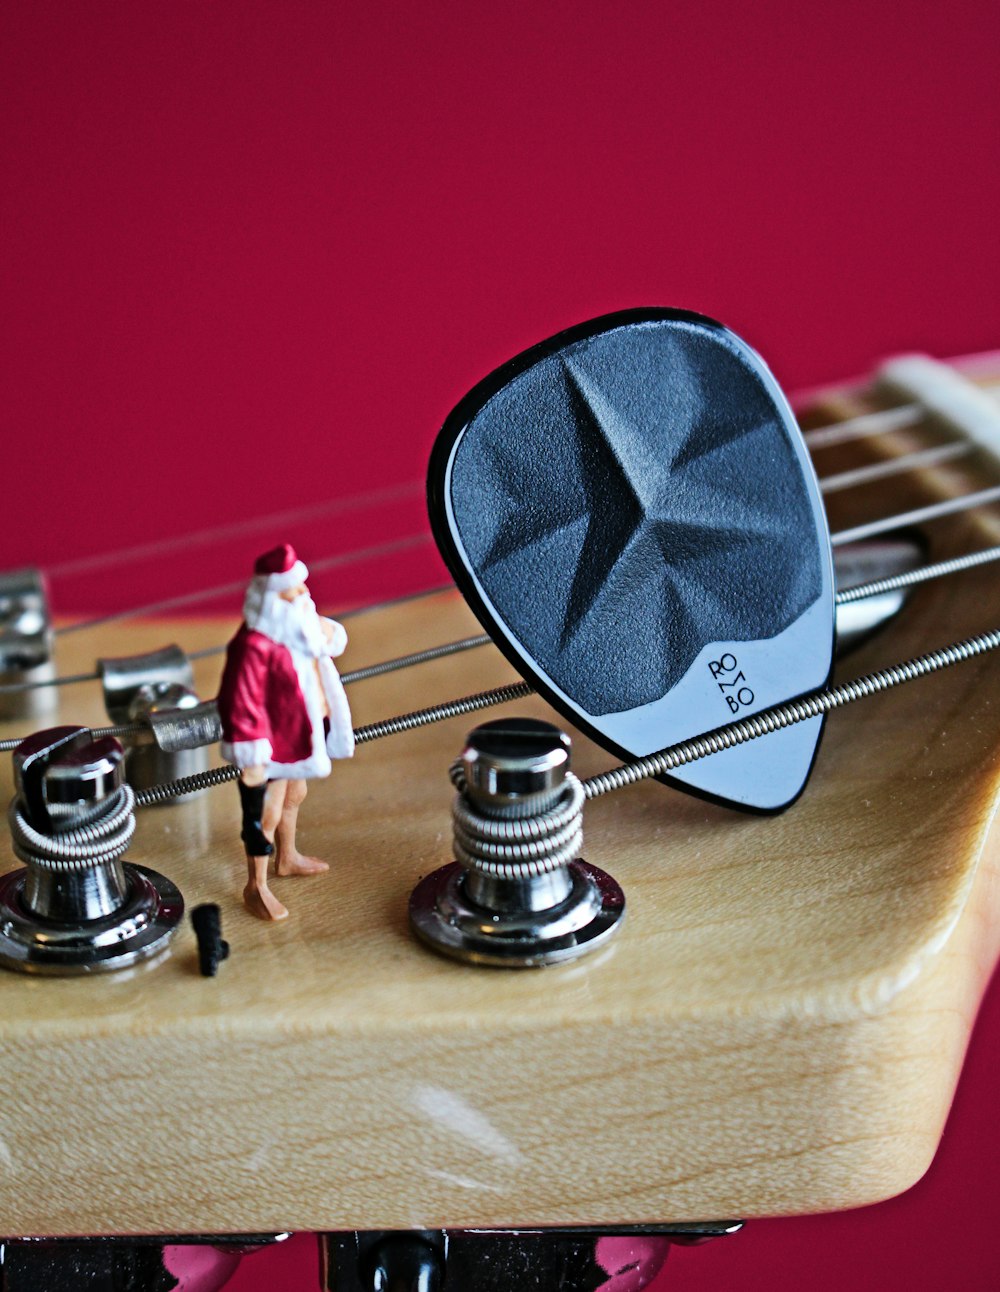 a miniature person standing on top of a guitar